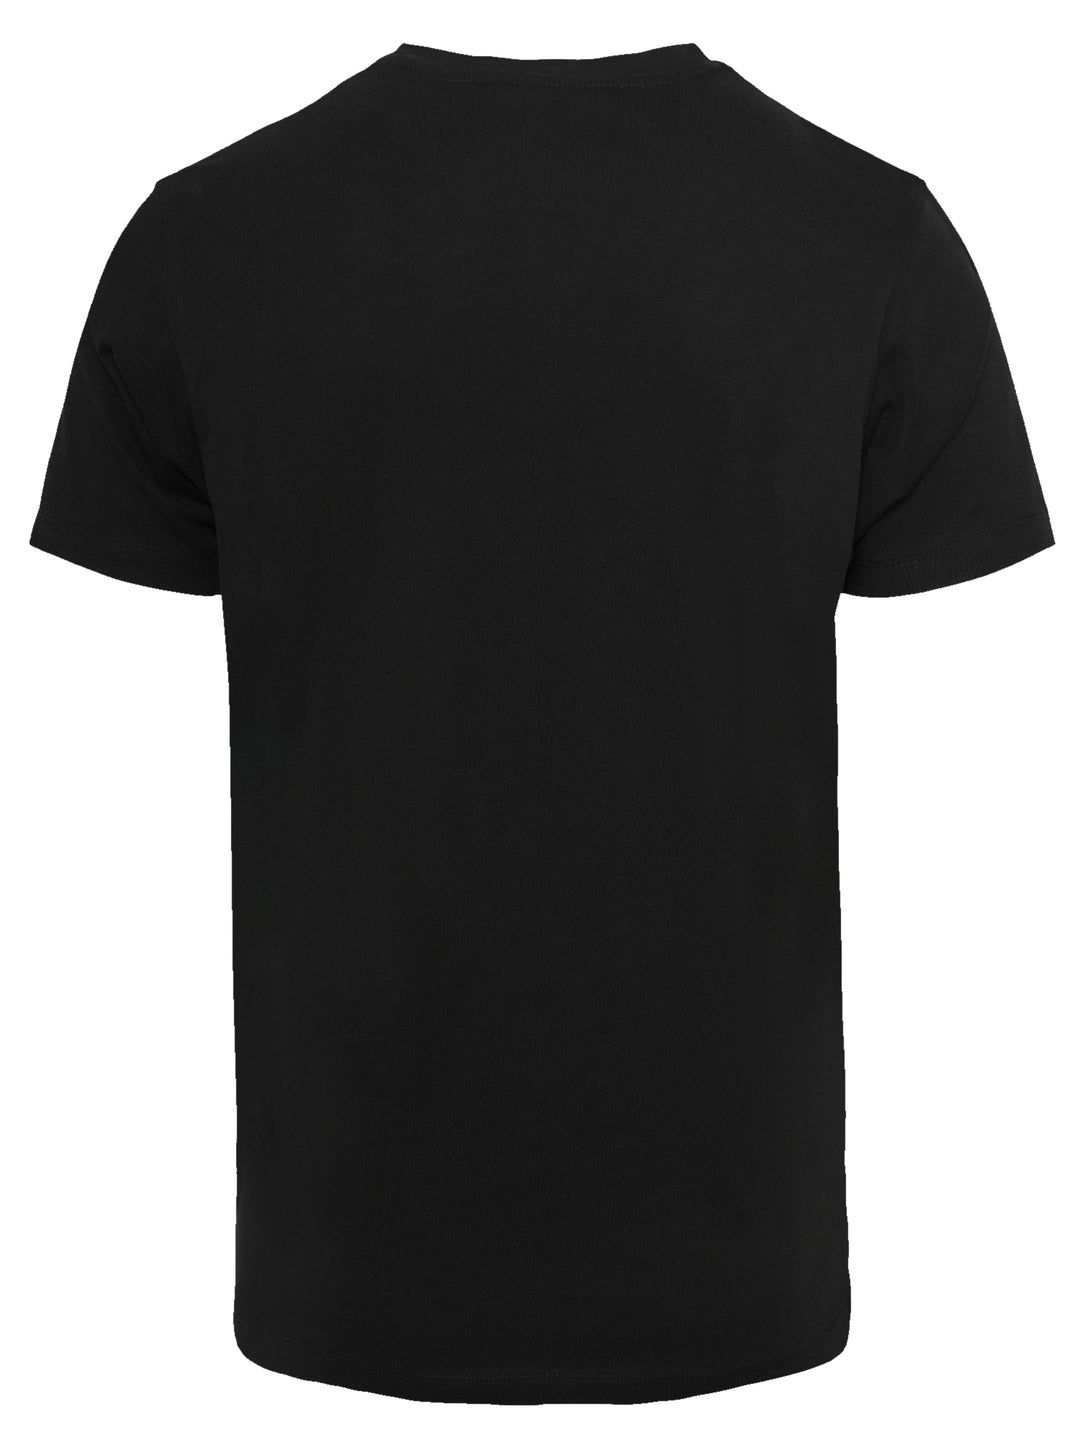 ALLES ATZE with T-Shirt Round Neck